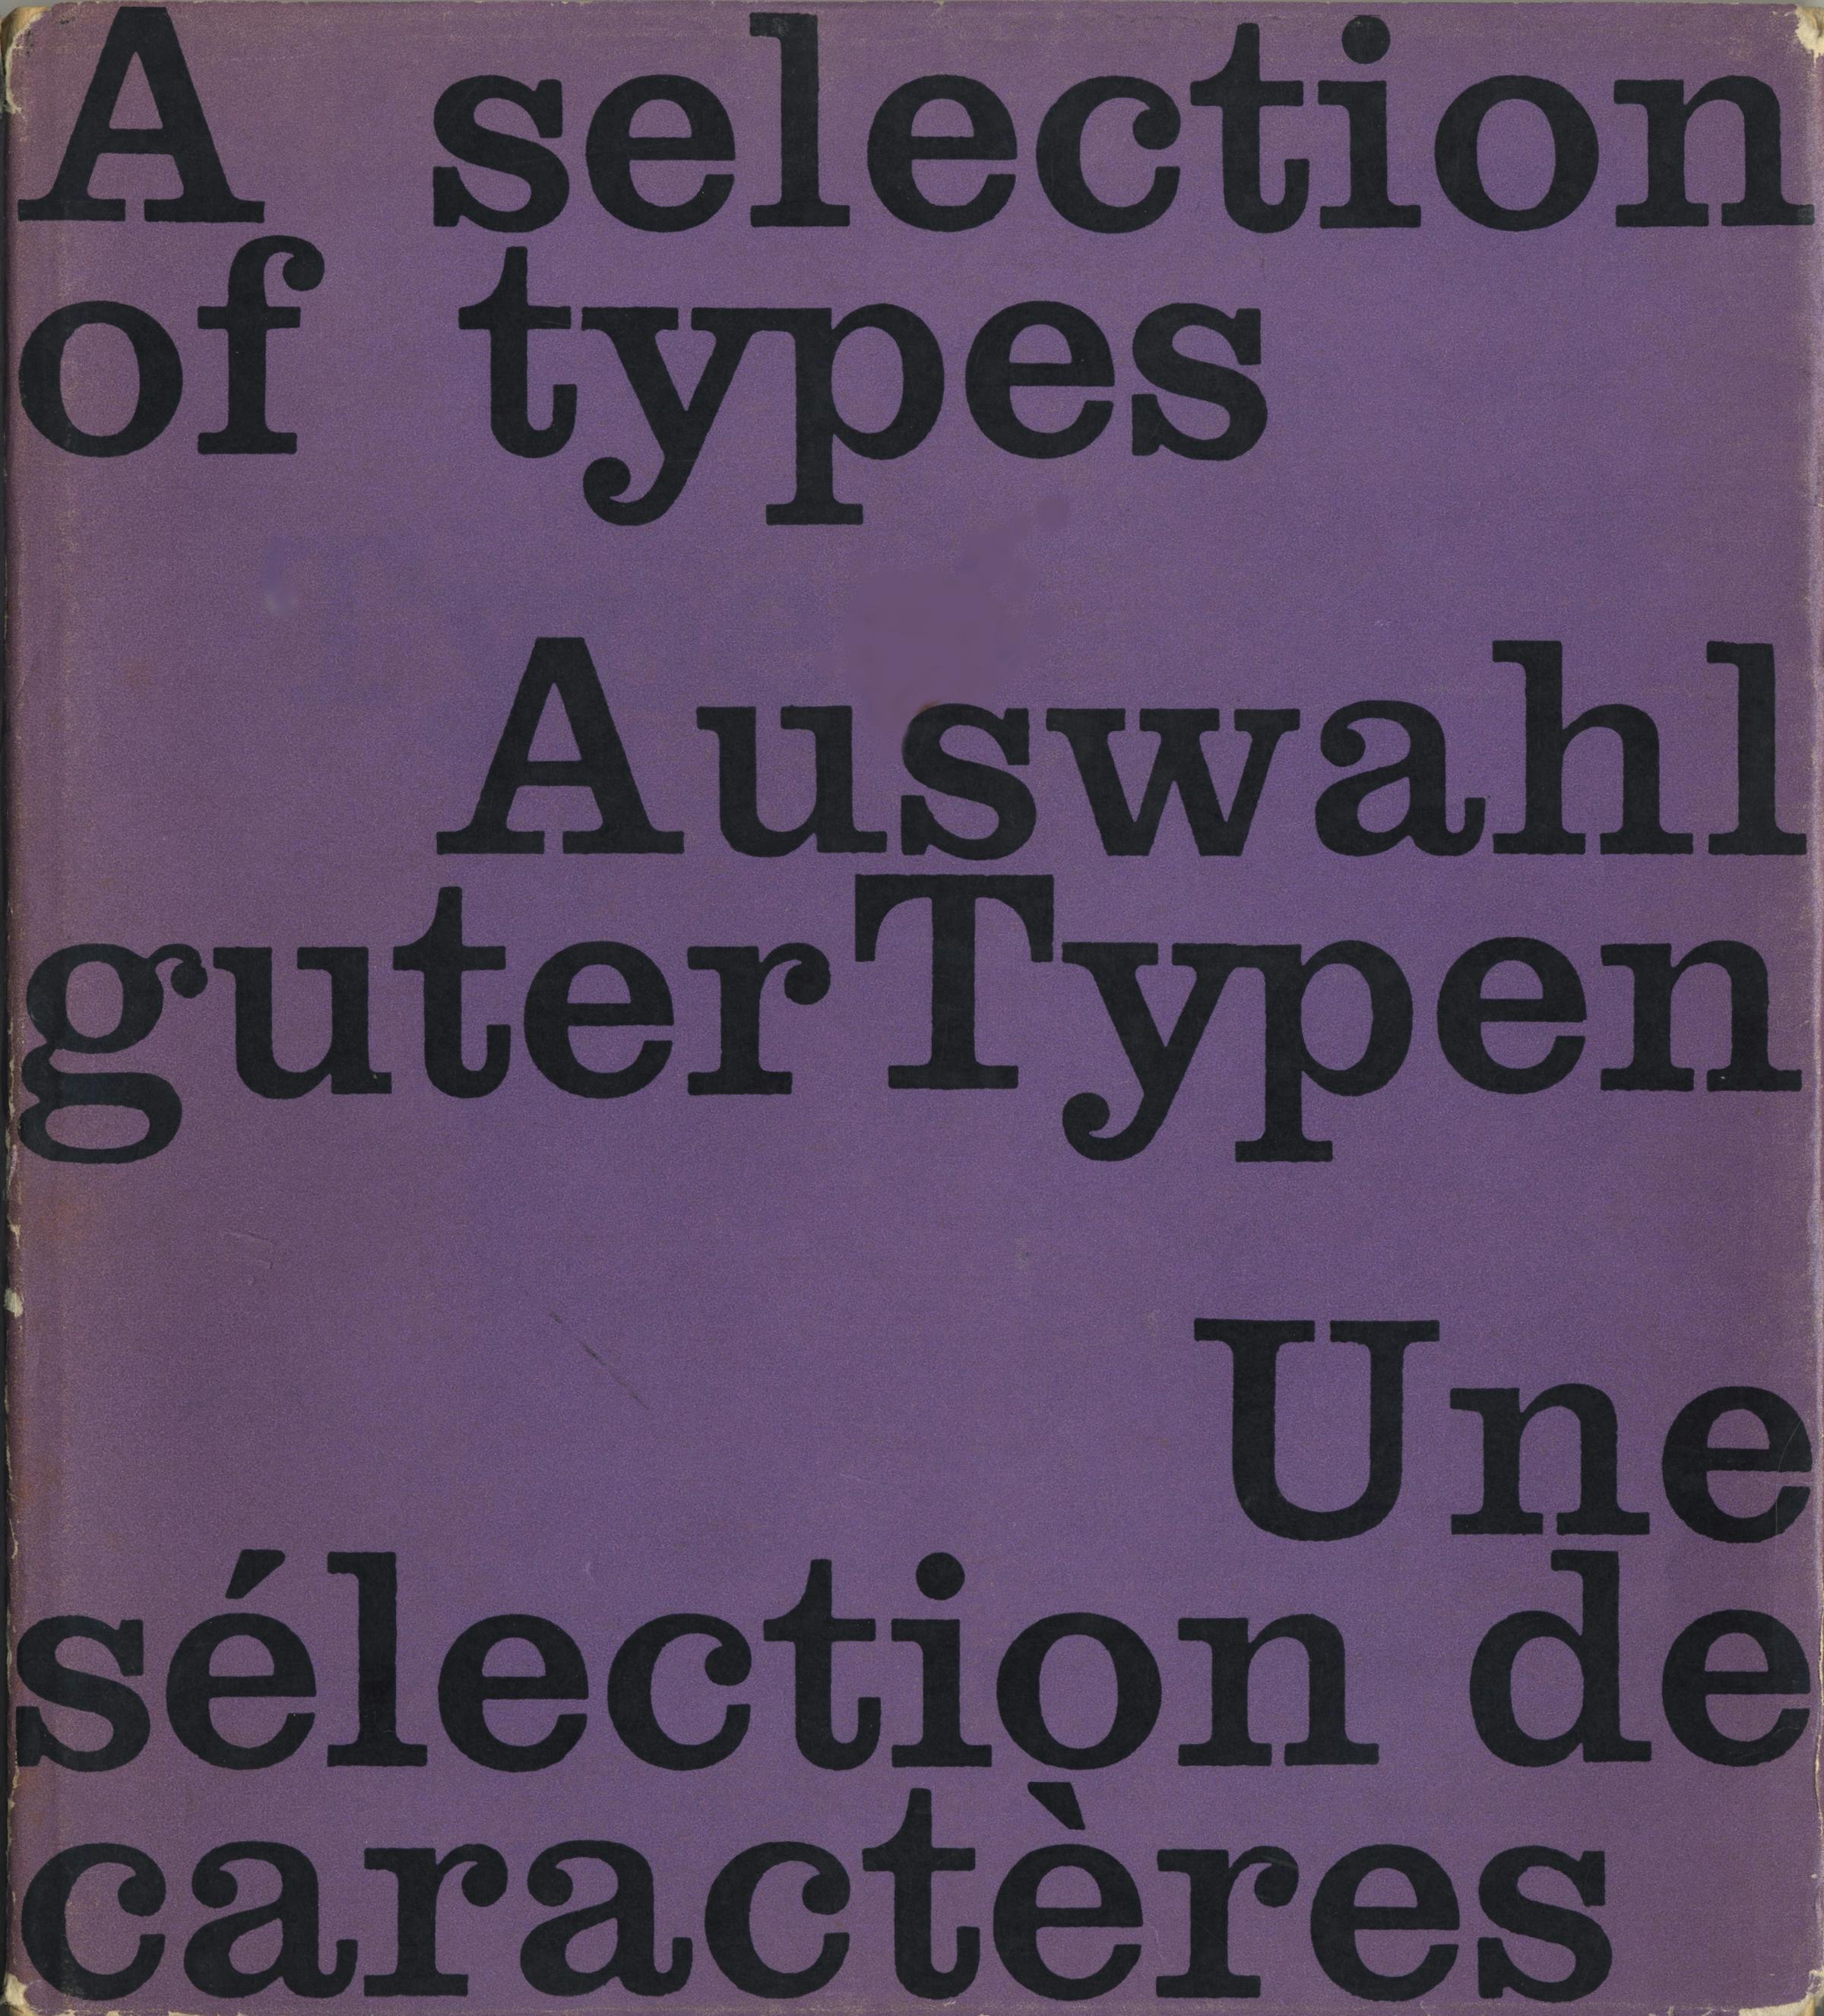 “Type. Une sélection de caractères d’imprimerie” by Rudolf Hostettler — A notable 1958 compilation amidst the rise of phototypesetting and Swiss typography"